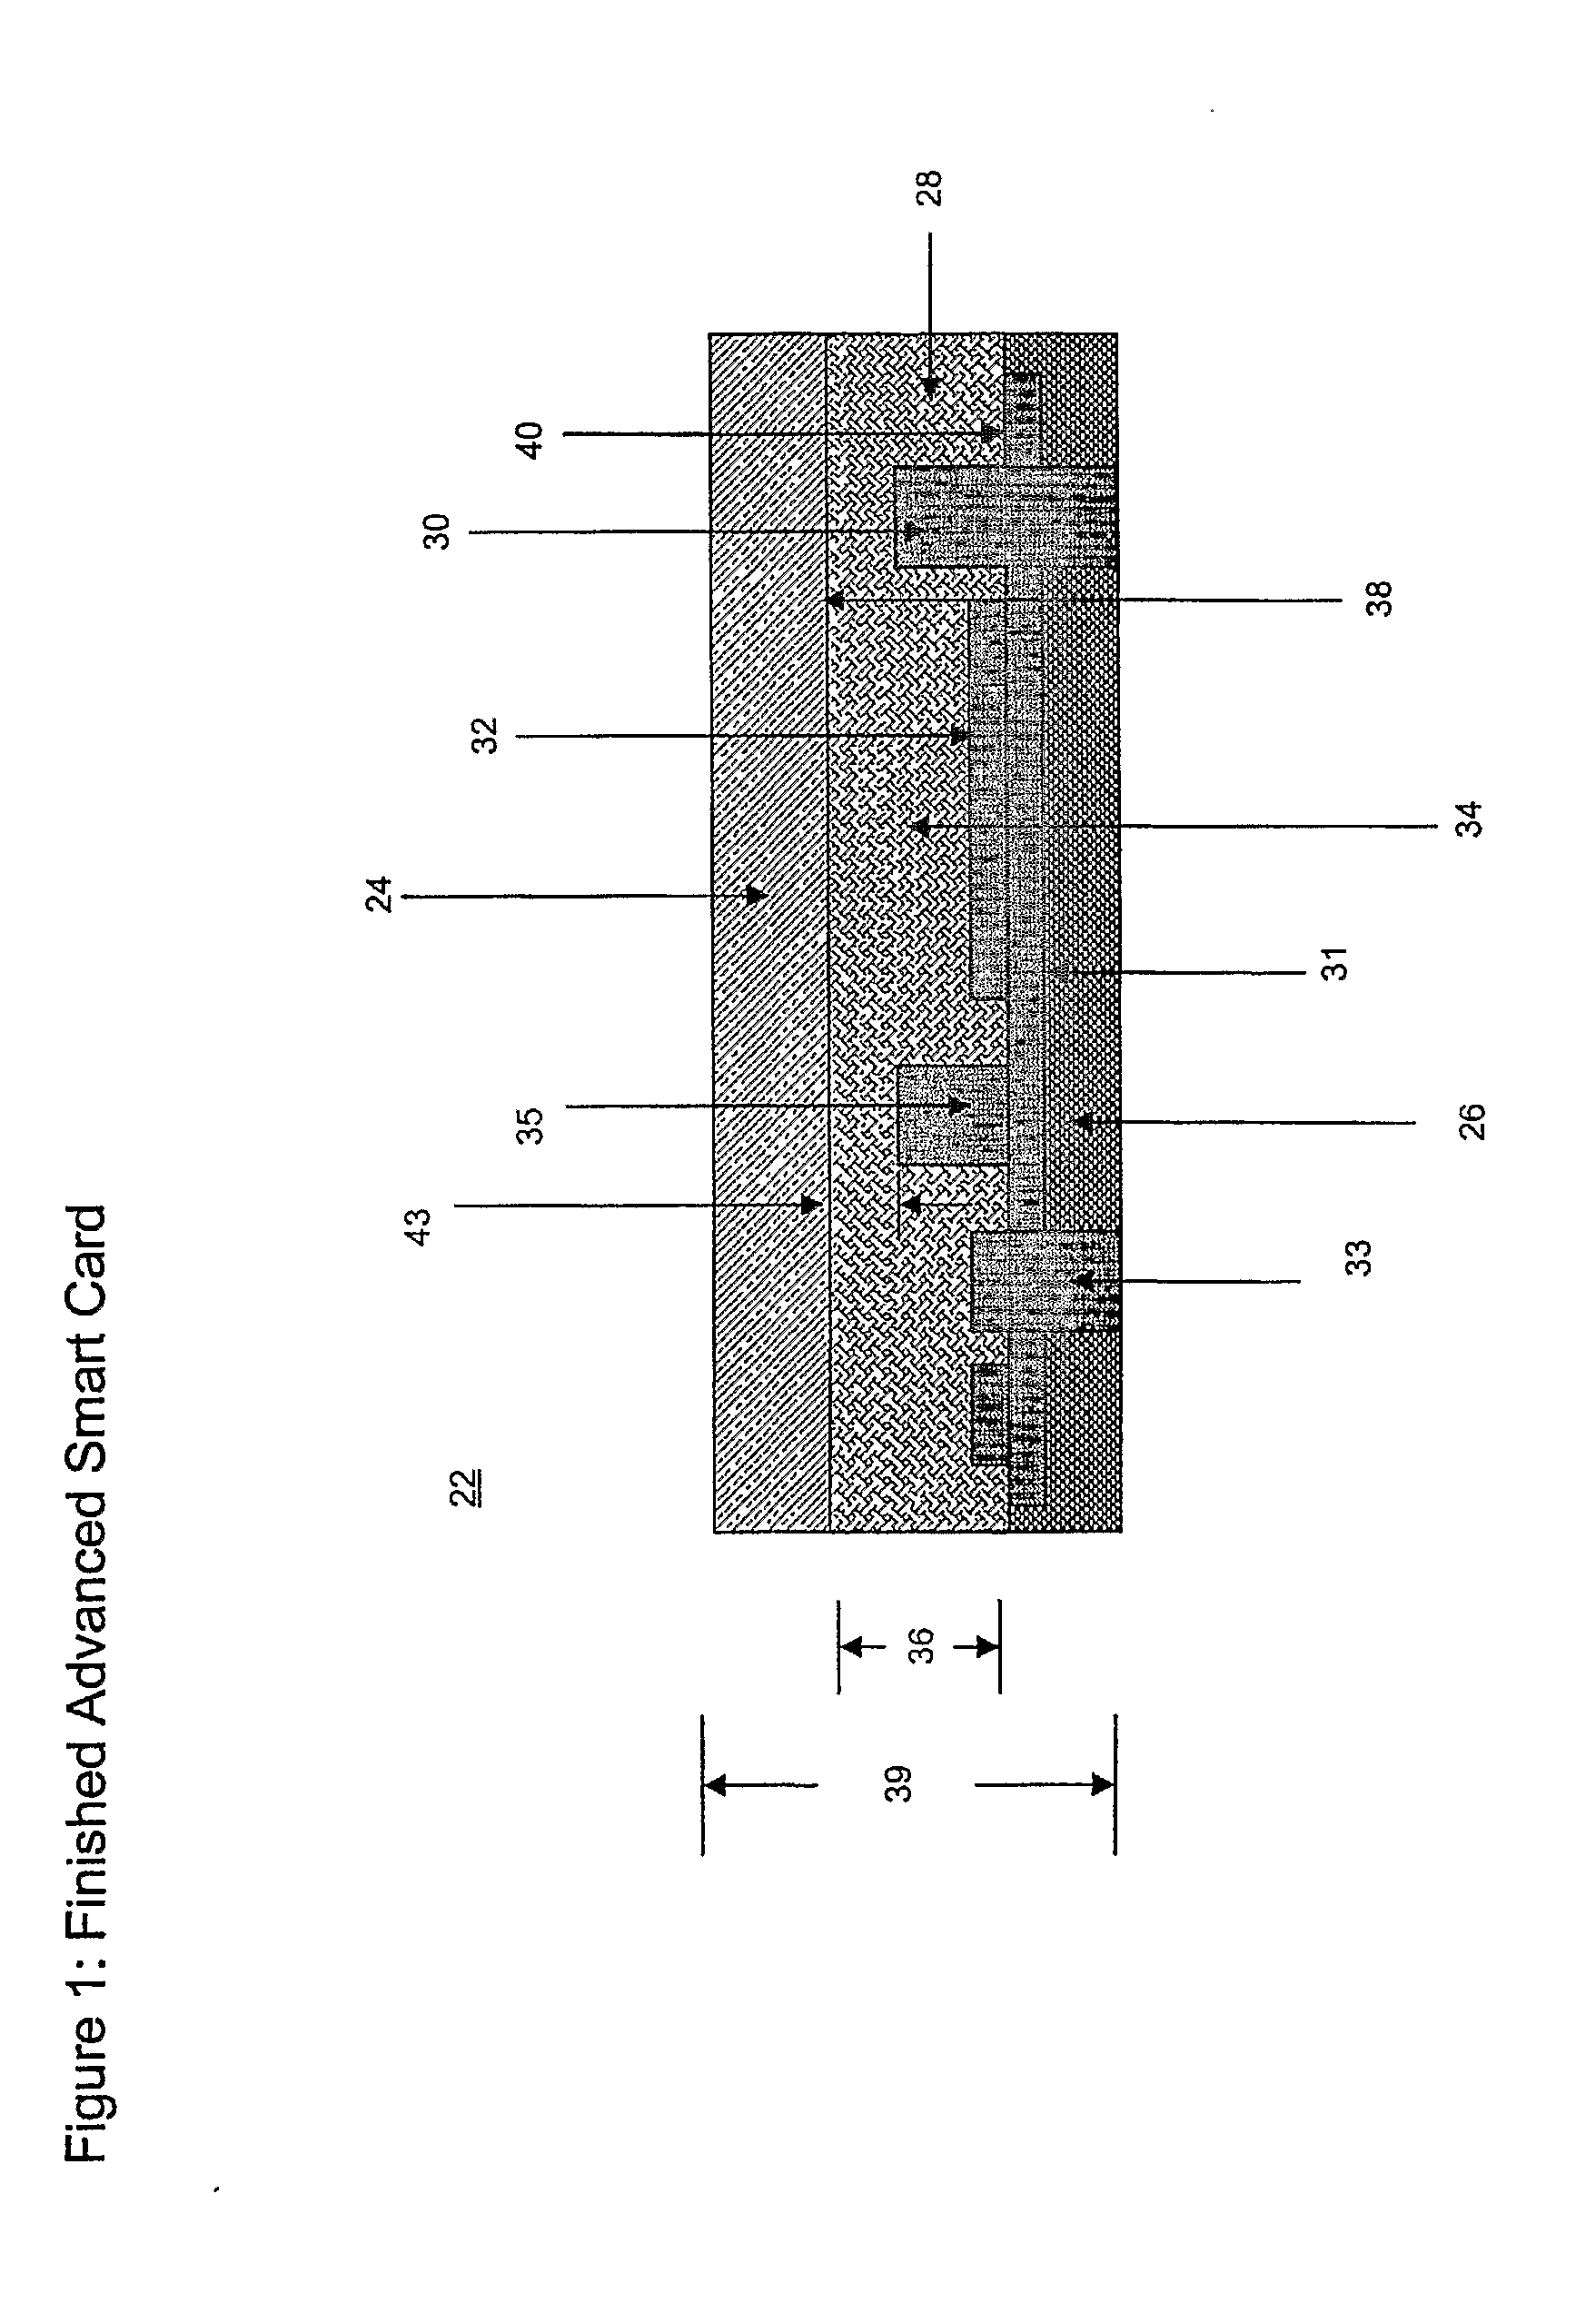 Method for Making Advanced Smart Cards With Integrated Electronics Using Isotropic Thermoset Adhesive Materials With High Quality Exterior Surfaces